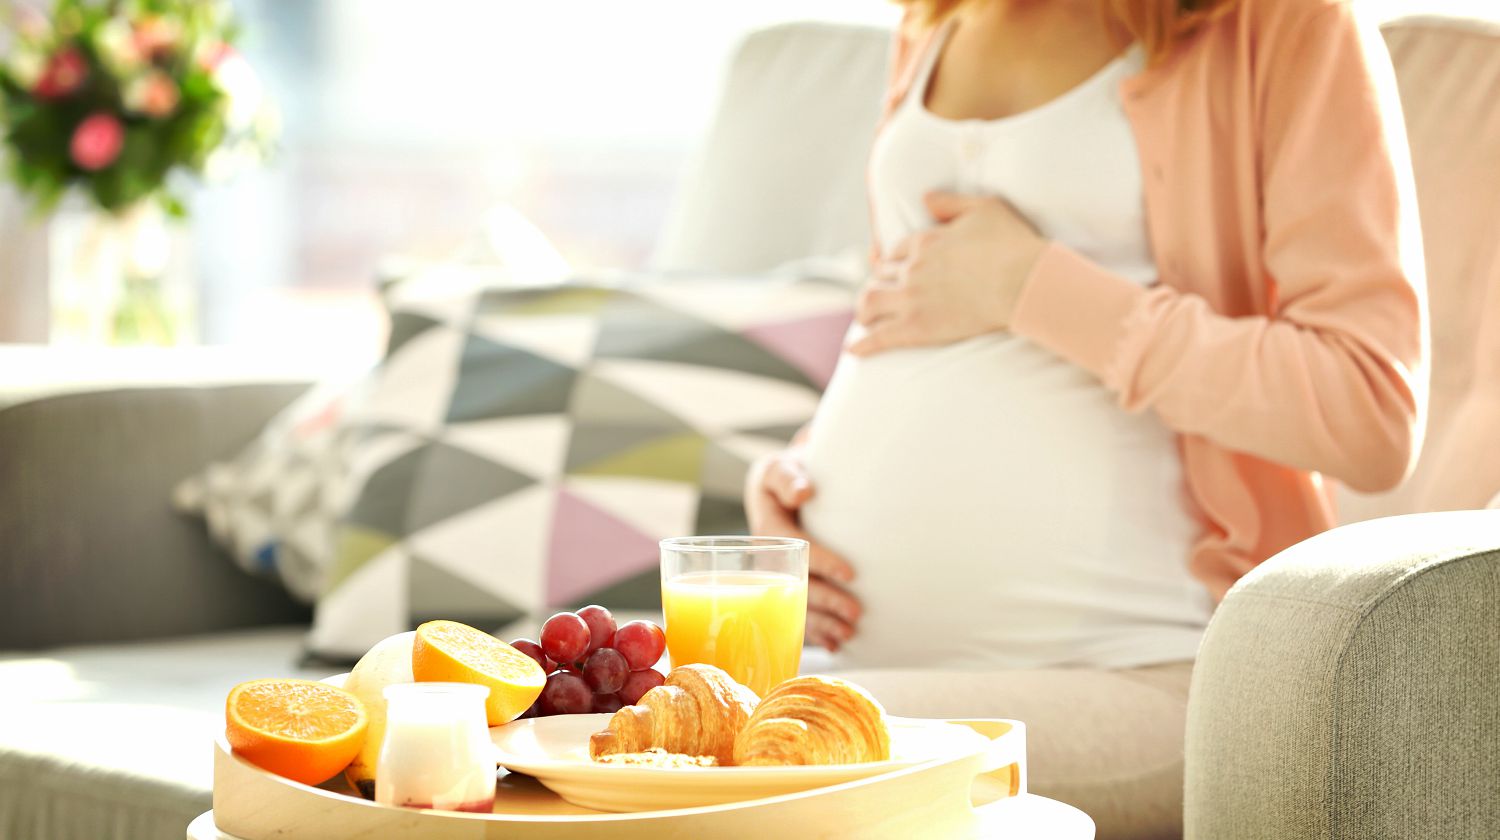 tray-healthy-breakfast-blurred-pregnant-woman-what-to-eat-ss-Feature.jpg